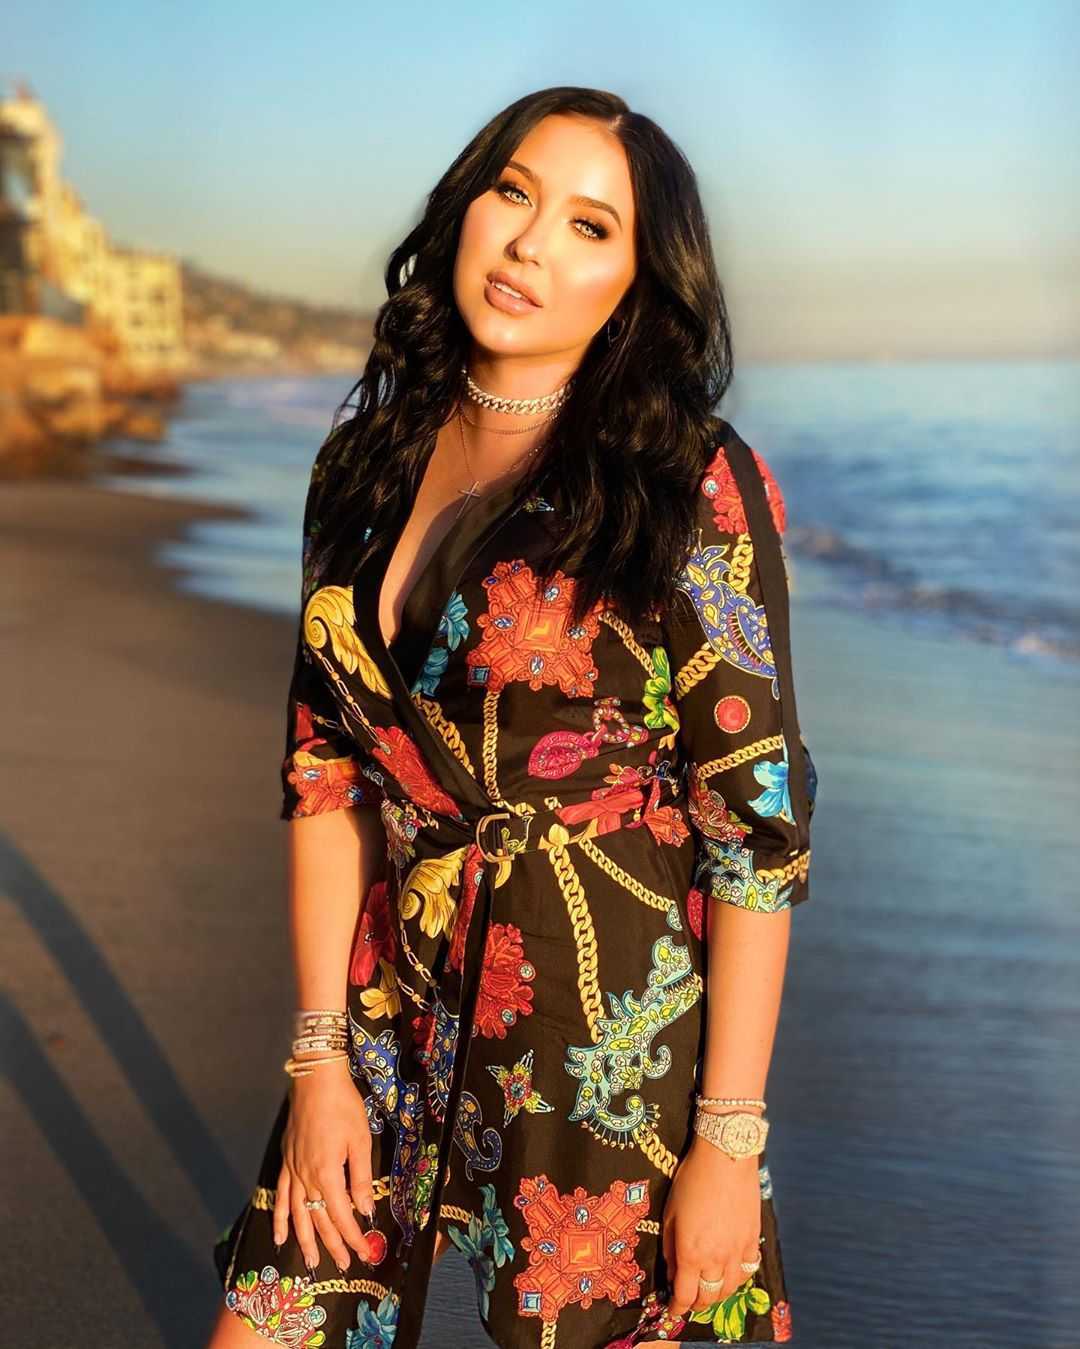 51 Hottest Jaclyn Hill Big Butt Pictures That Are Basically Flawless 369